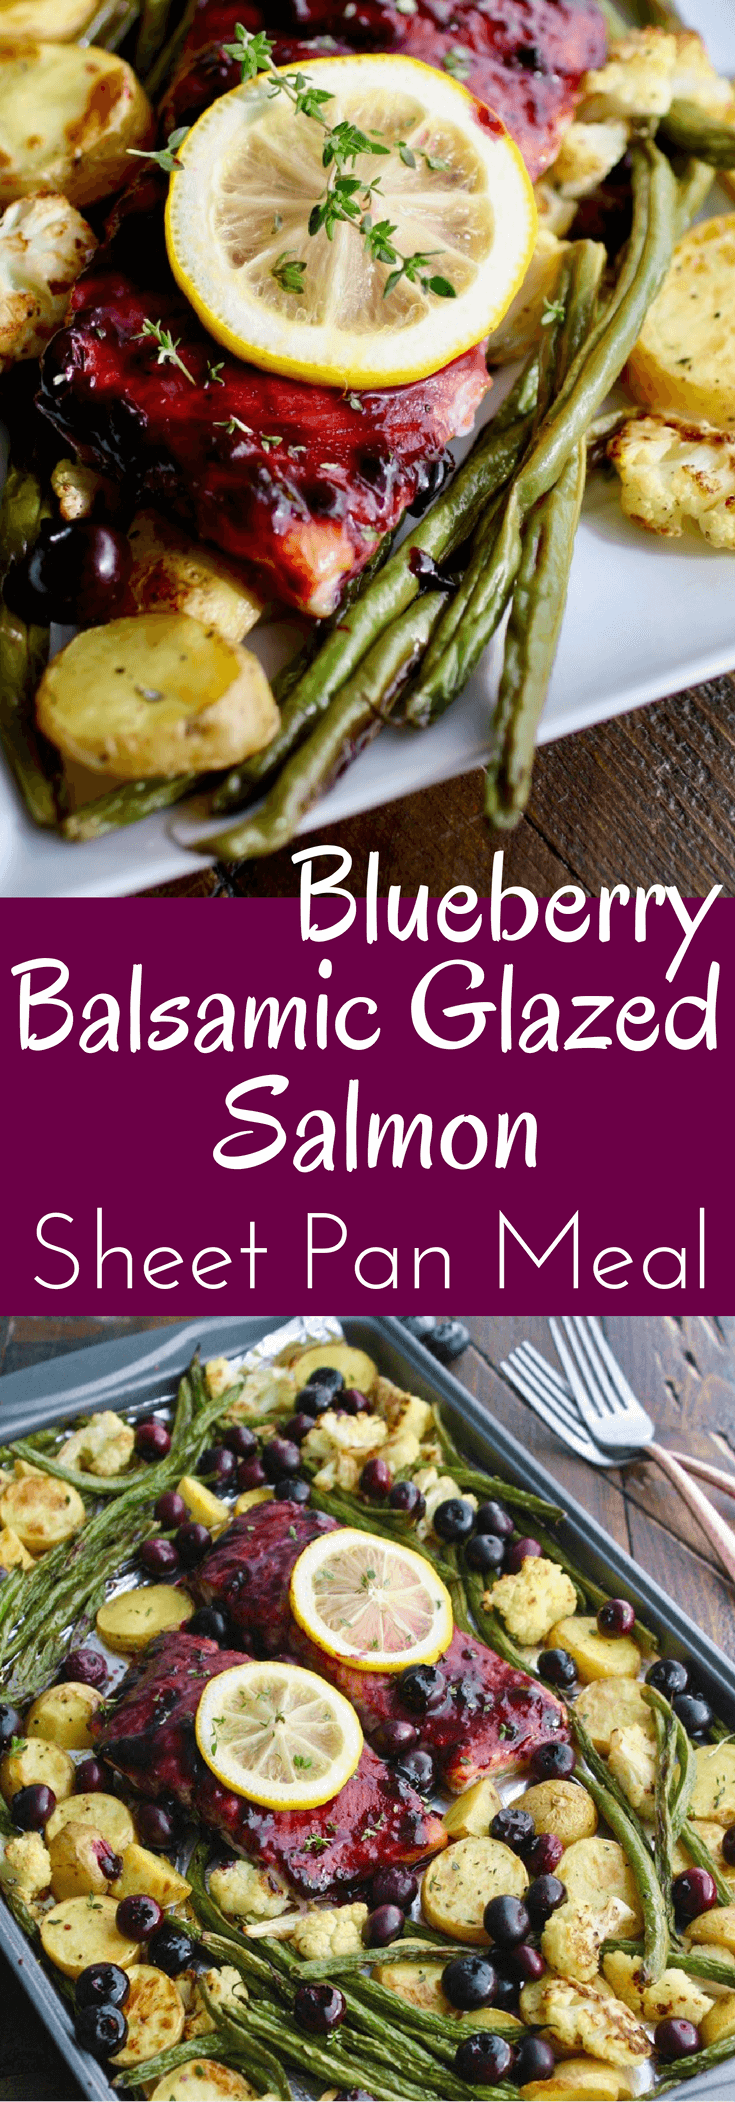 You'll really enjoy this delightful, easy-to-make dish: Sheet Pan Blueberry-Balsamic Glazed Salmon